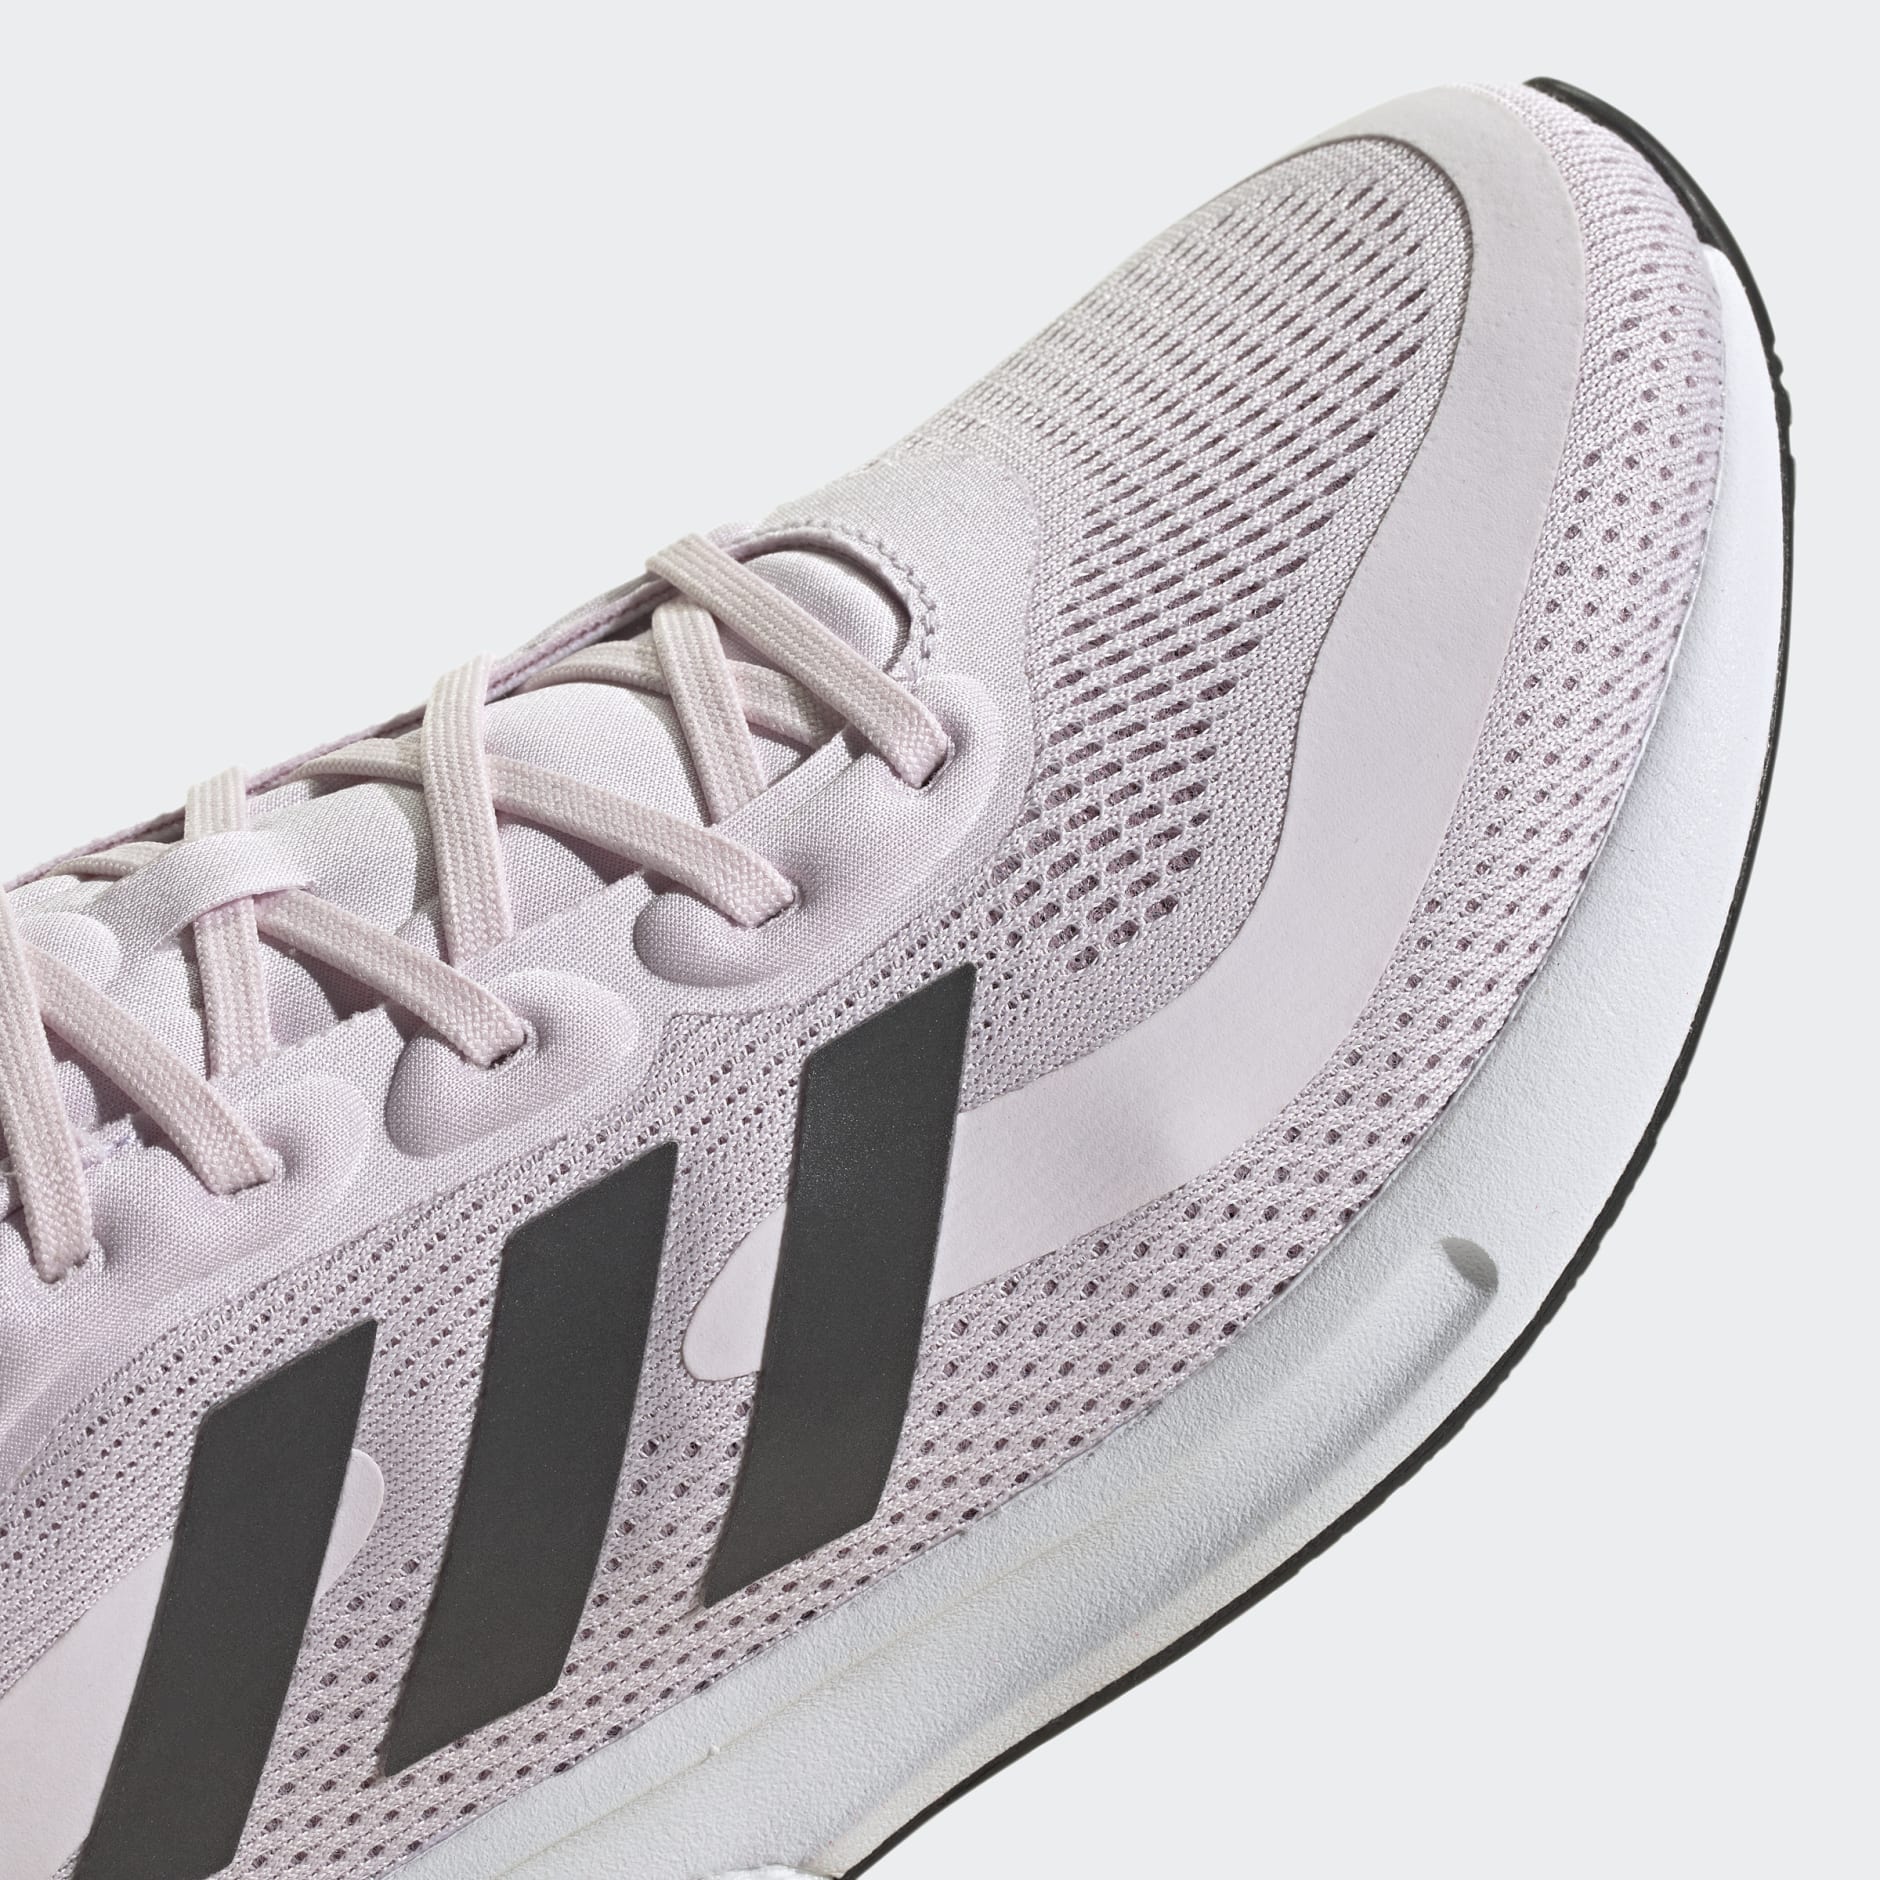 Shoes - Supernova Shoes - Pink | adidas South Africa